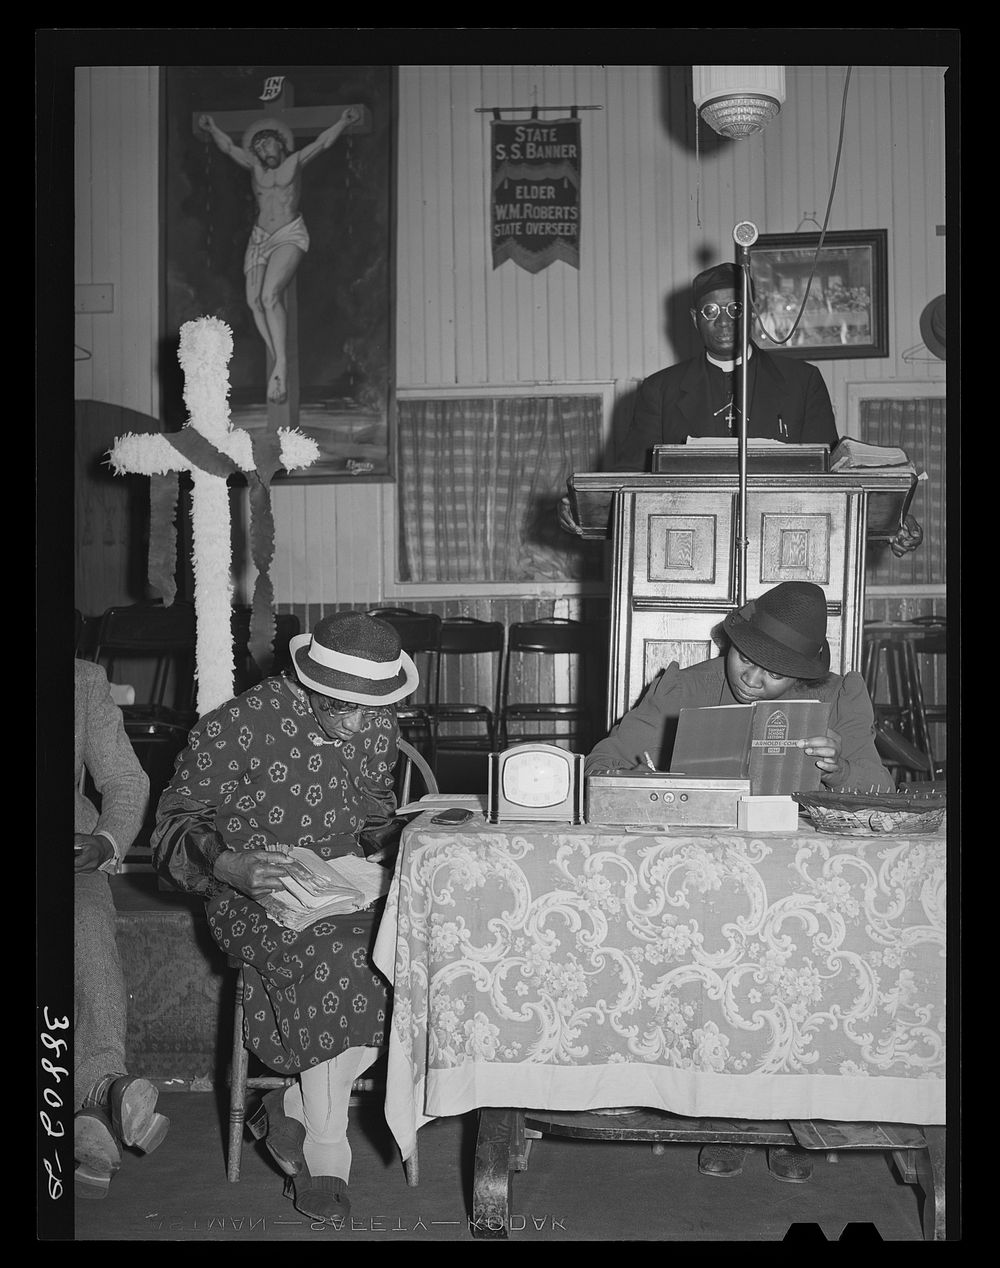 During the services at "storefront" Baptist church on Easter Sunday. Chicago, Illinois by Russell Lee